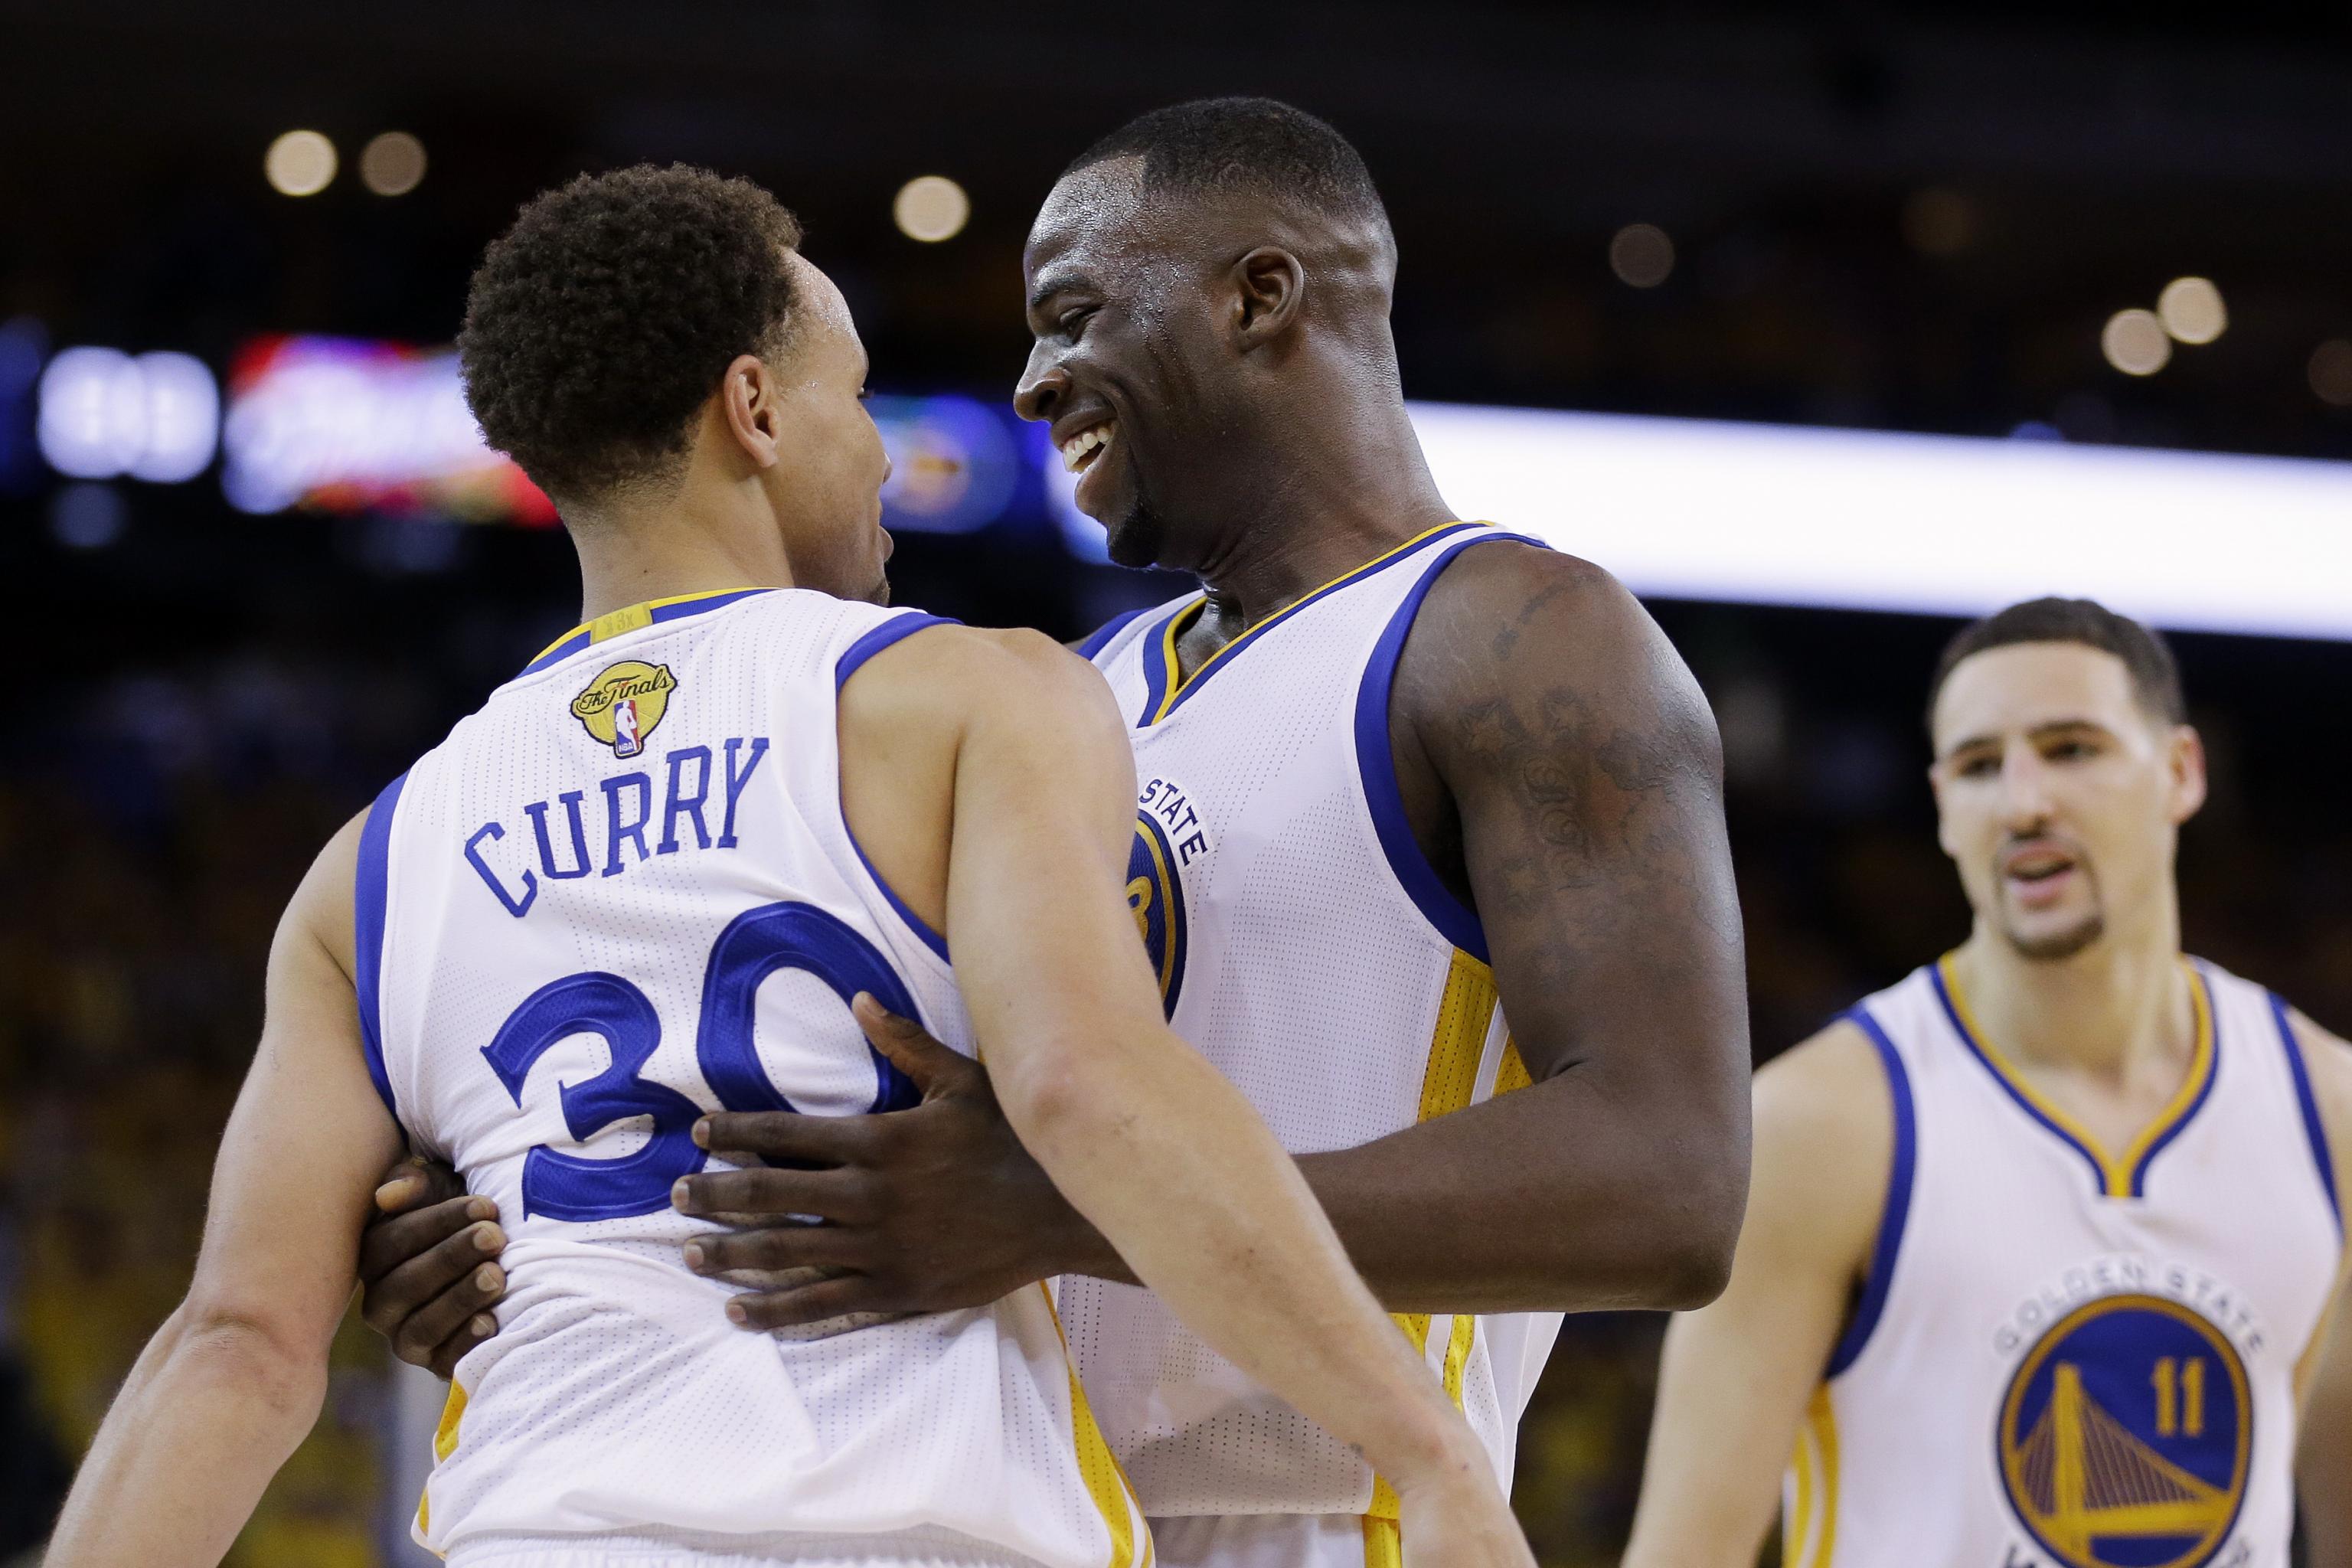 Warriors avoided Steph Curry, Klay Thompson trade blunder